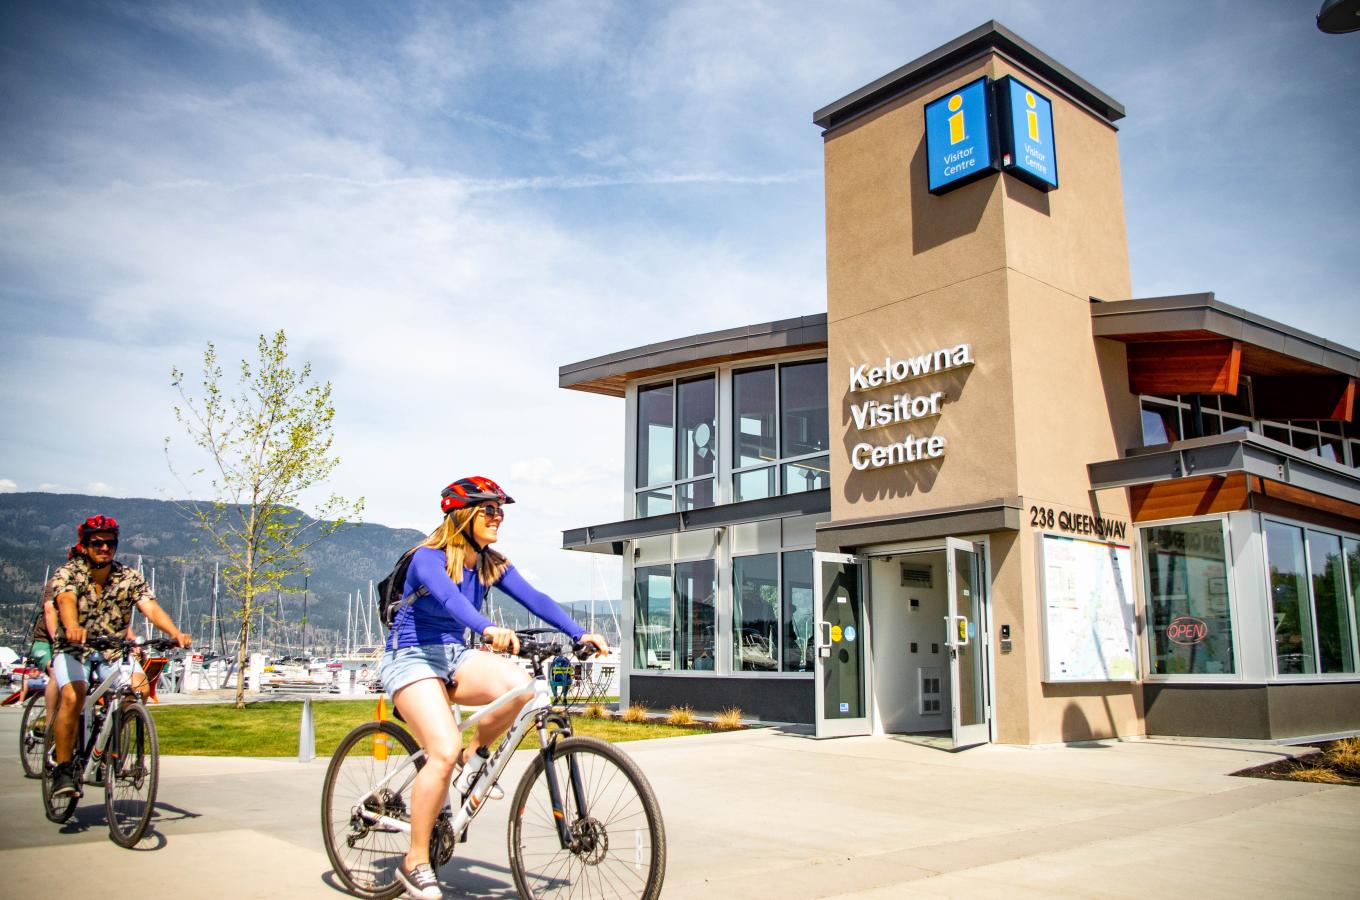 Biking in front of the Kelowna Visitor Centre